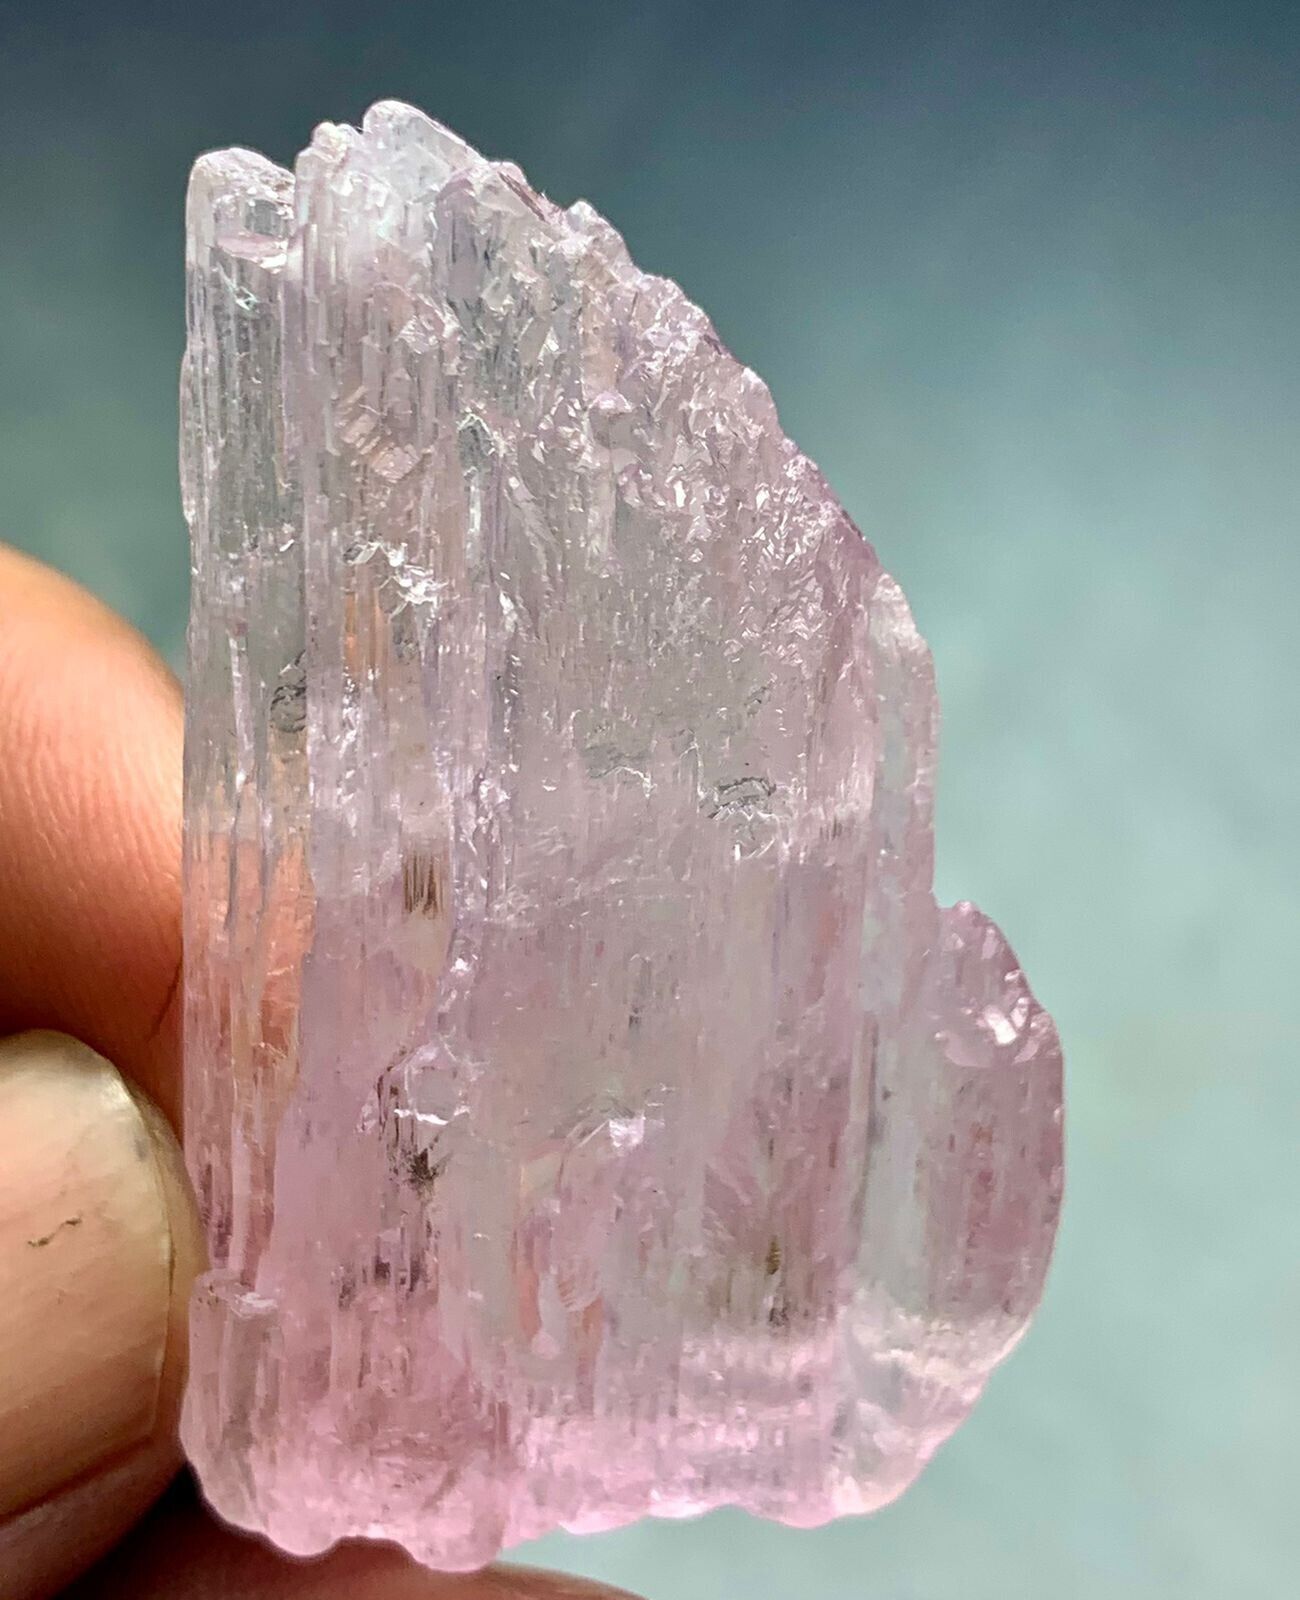 84 Cts Double Terminated Pink Kunzite Crystal from Afghanistan